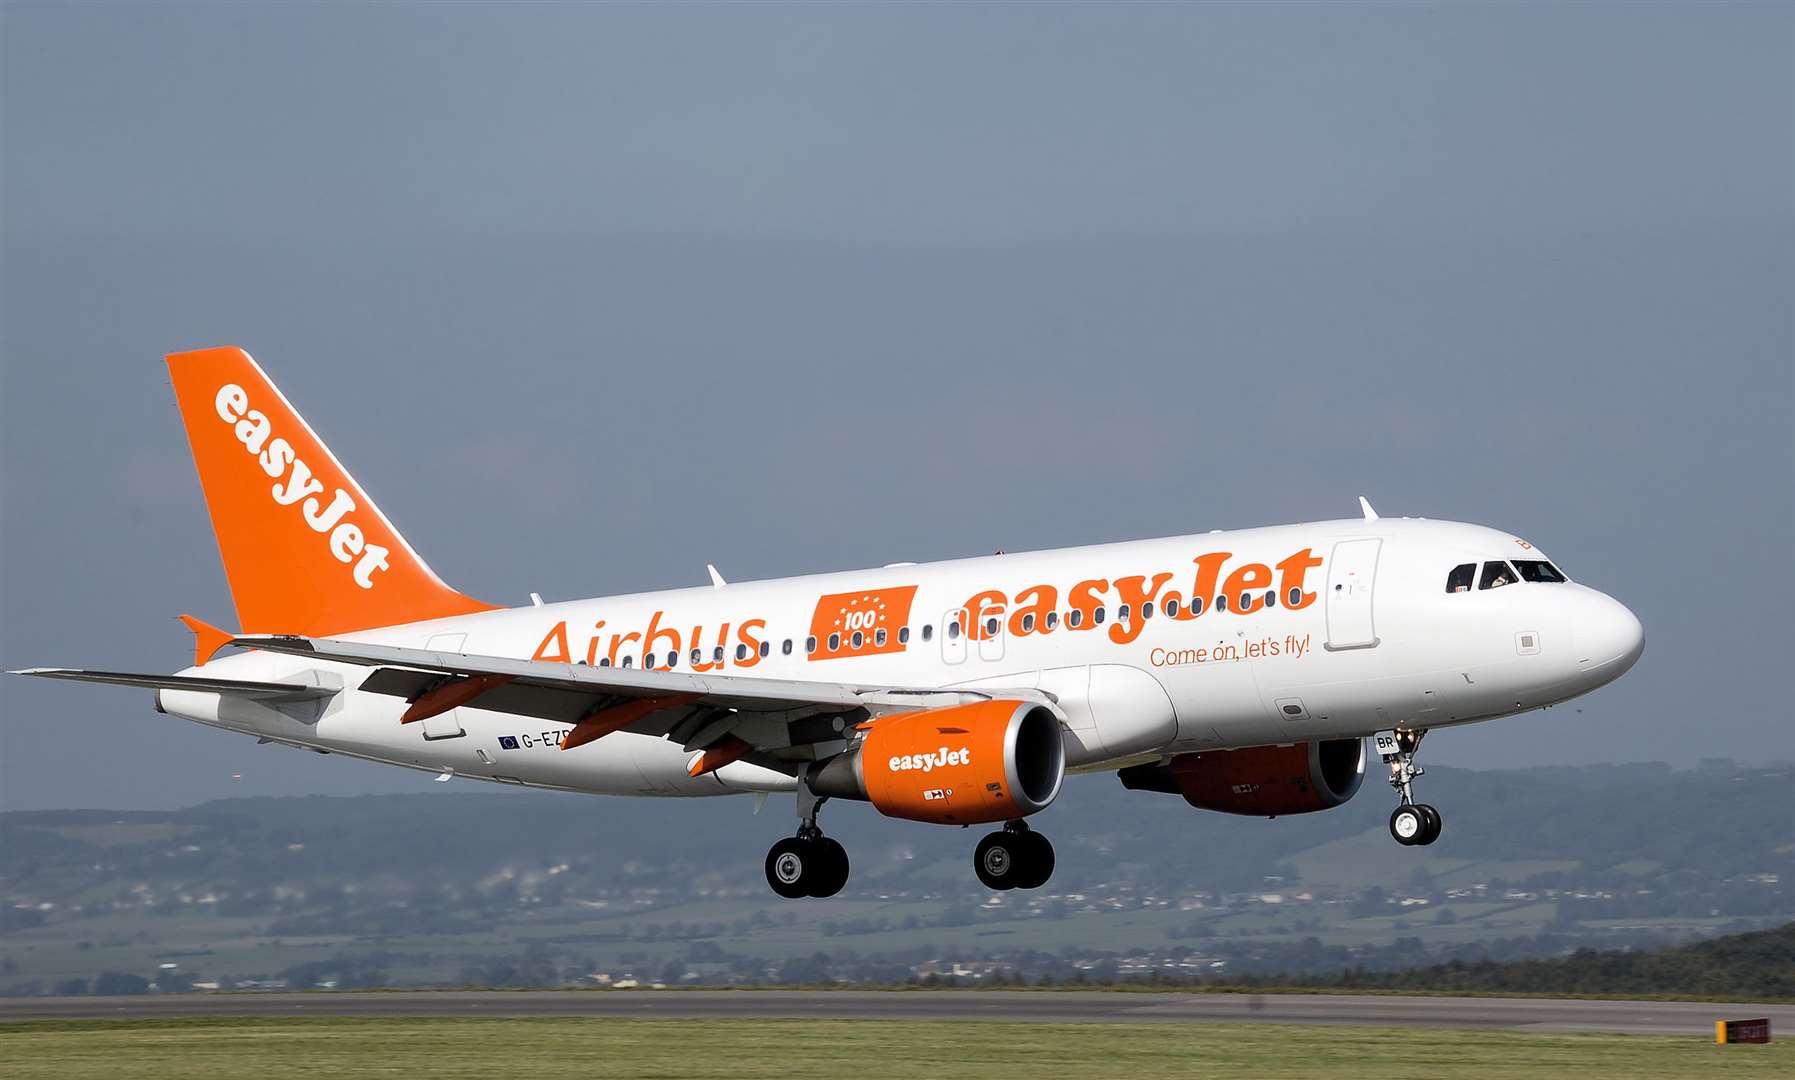 Brigette Barrett boarded an Easyjet flight to Marbella as she overcame her fear of flying